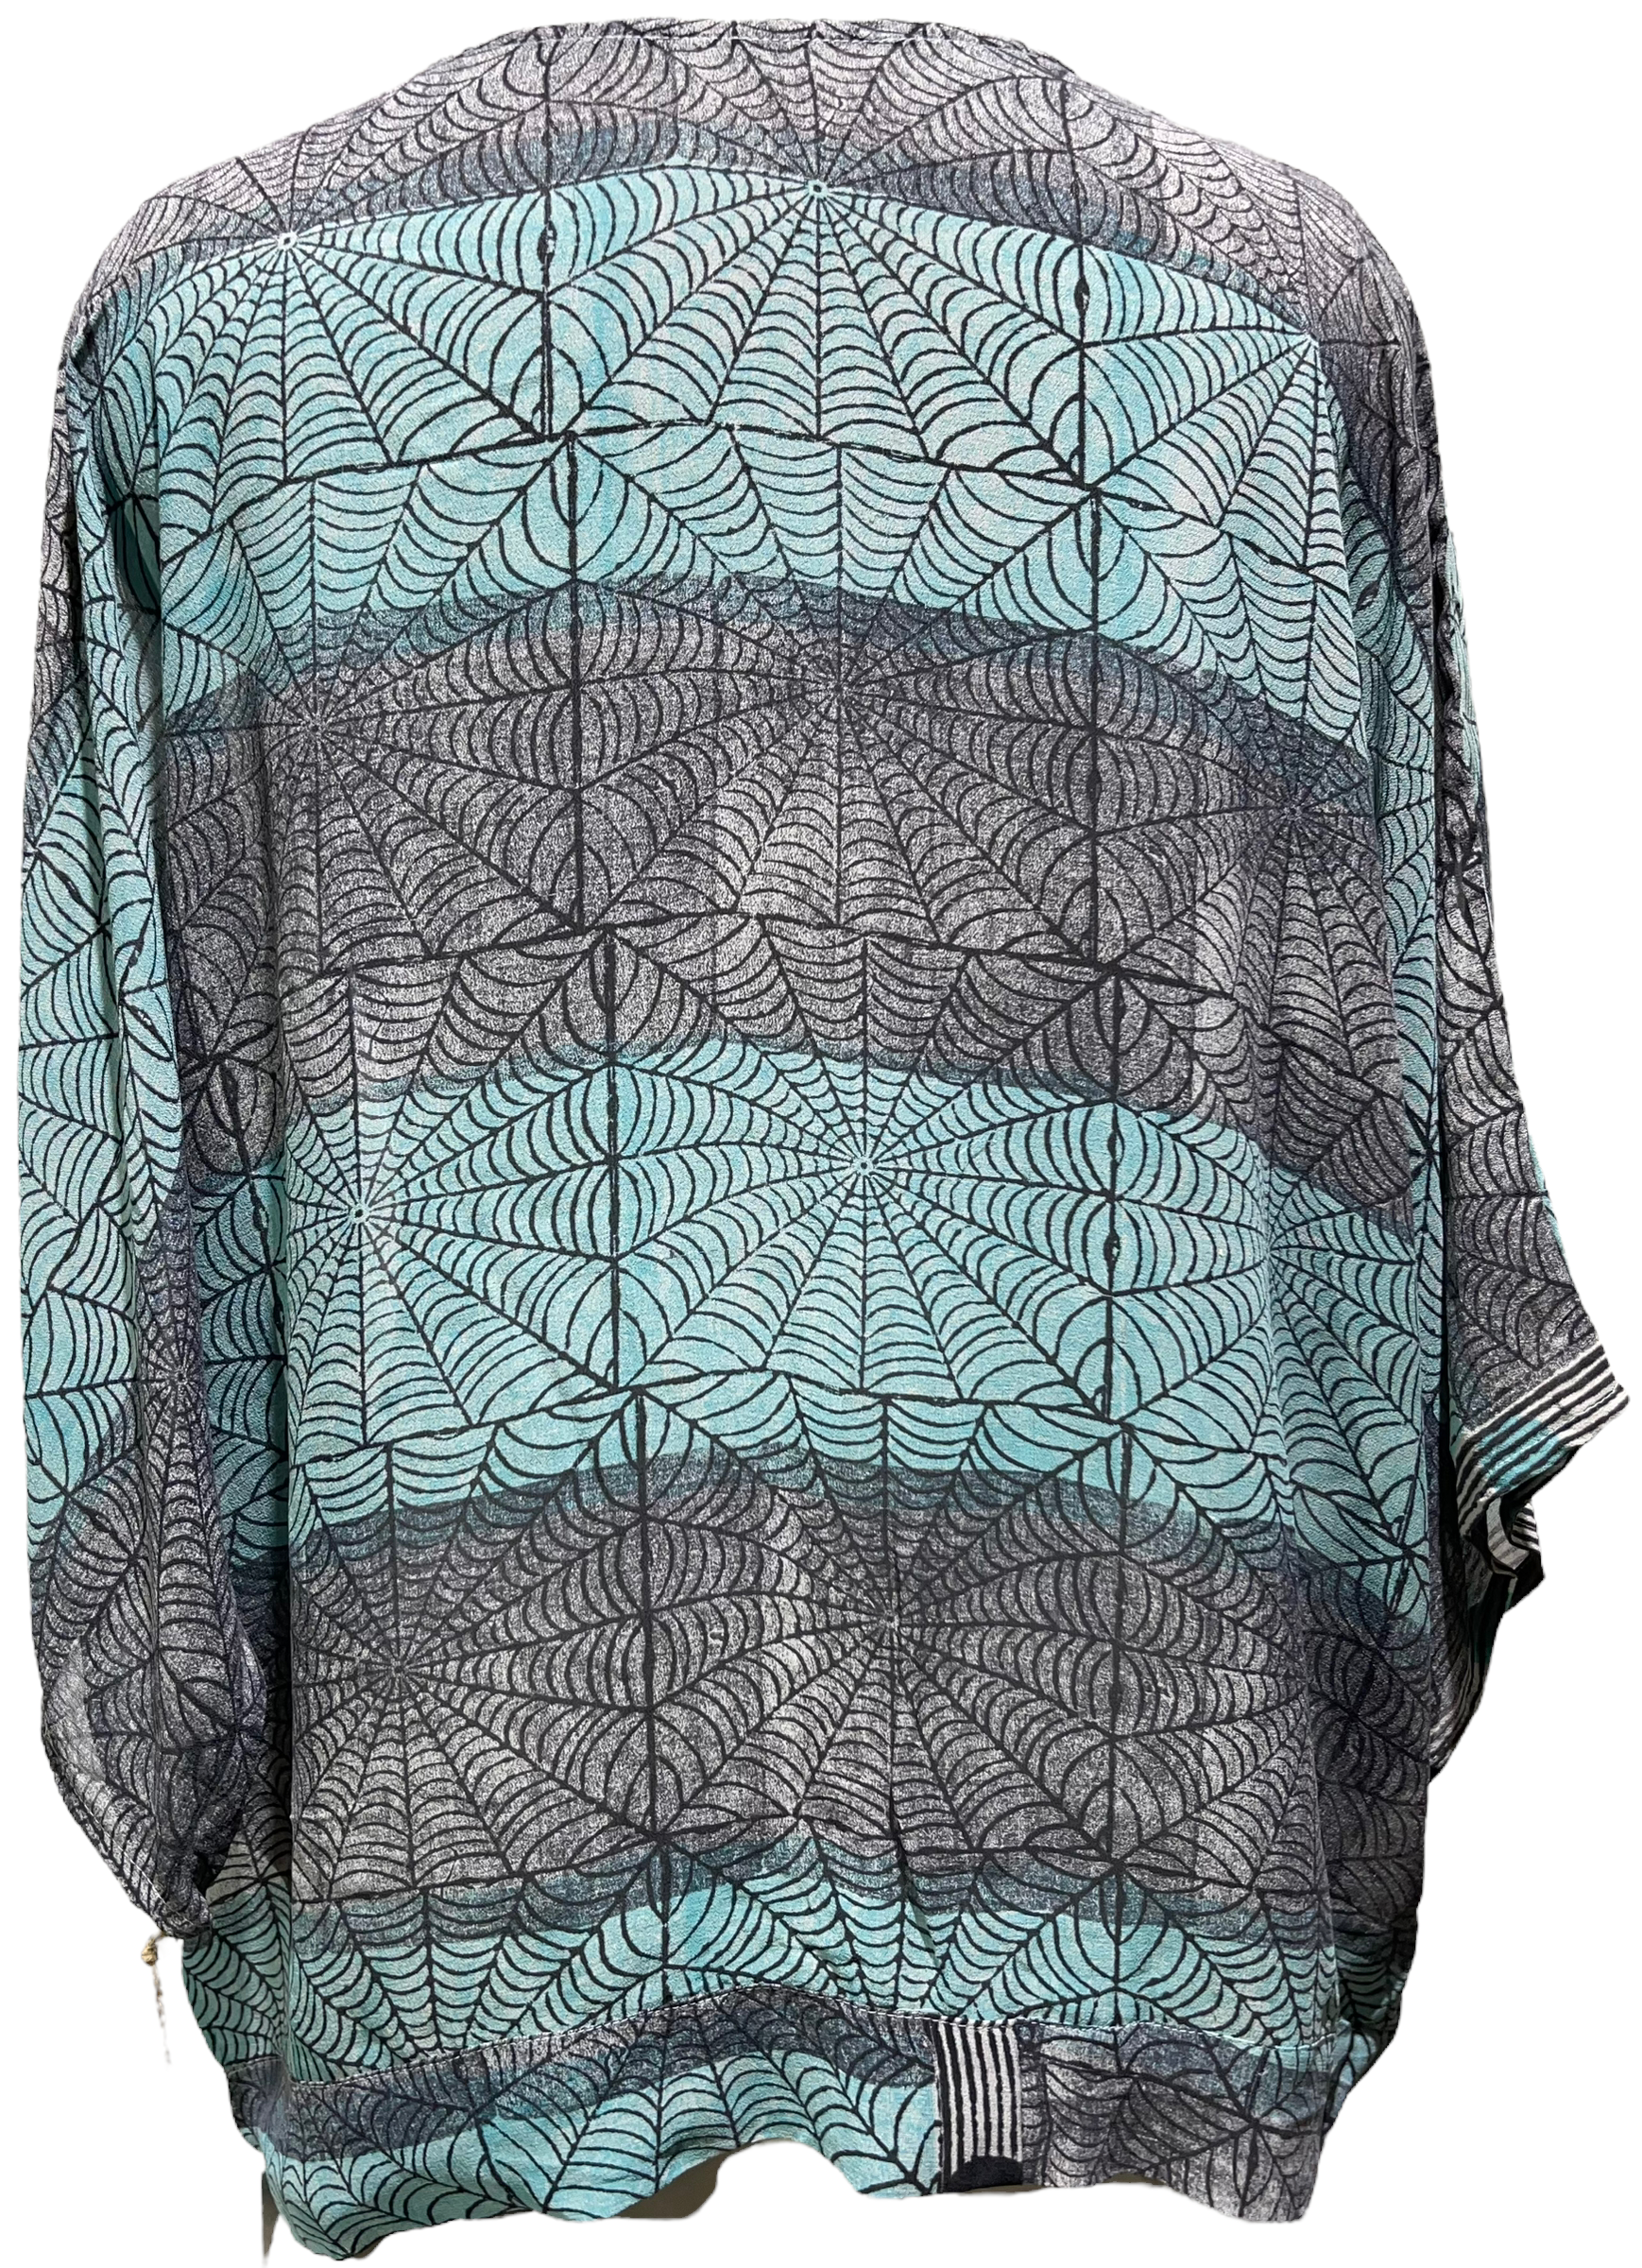 Eve Arnold Sheer Avatar Pure Silk Front Tie Top